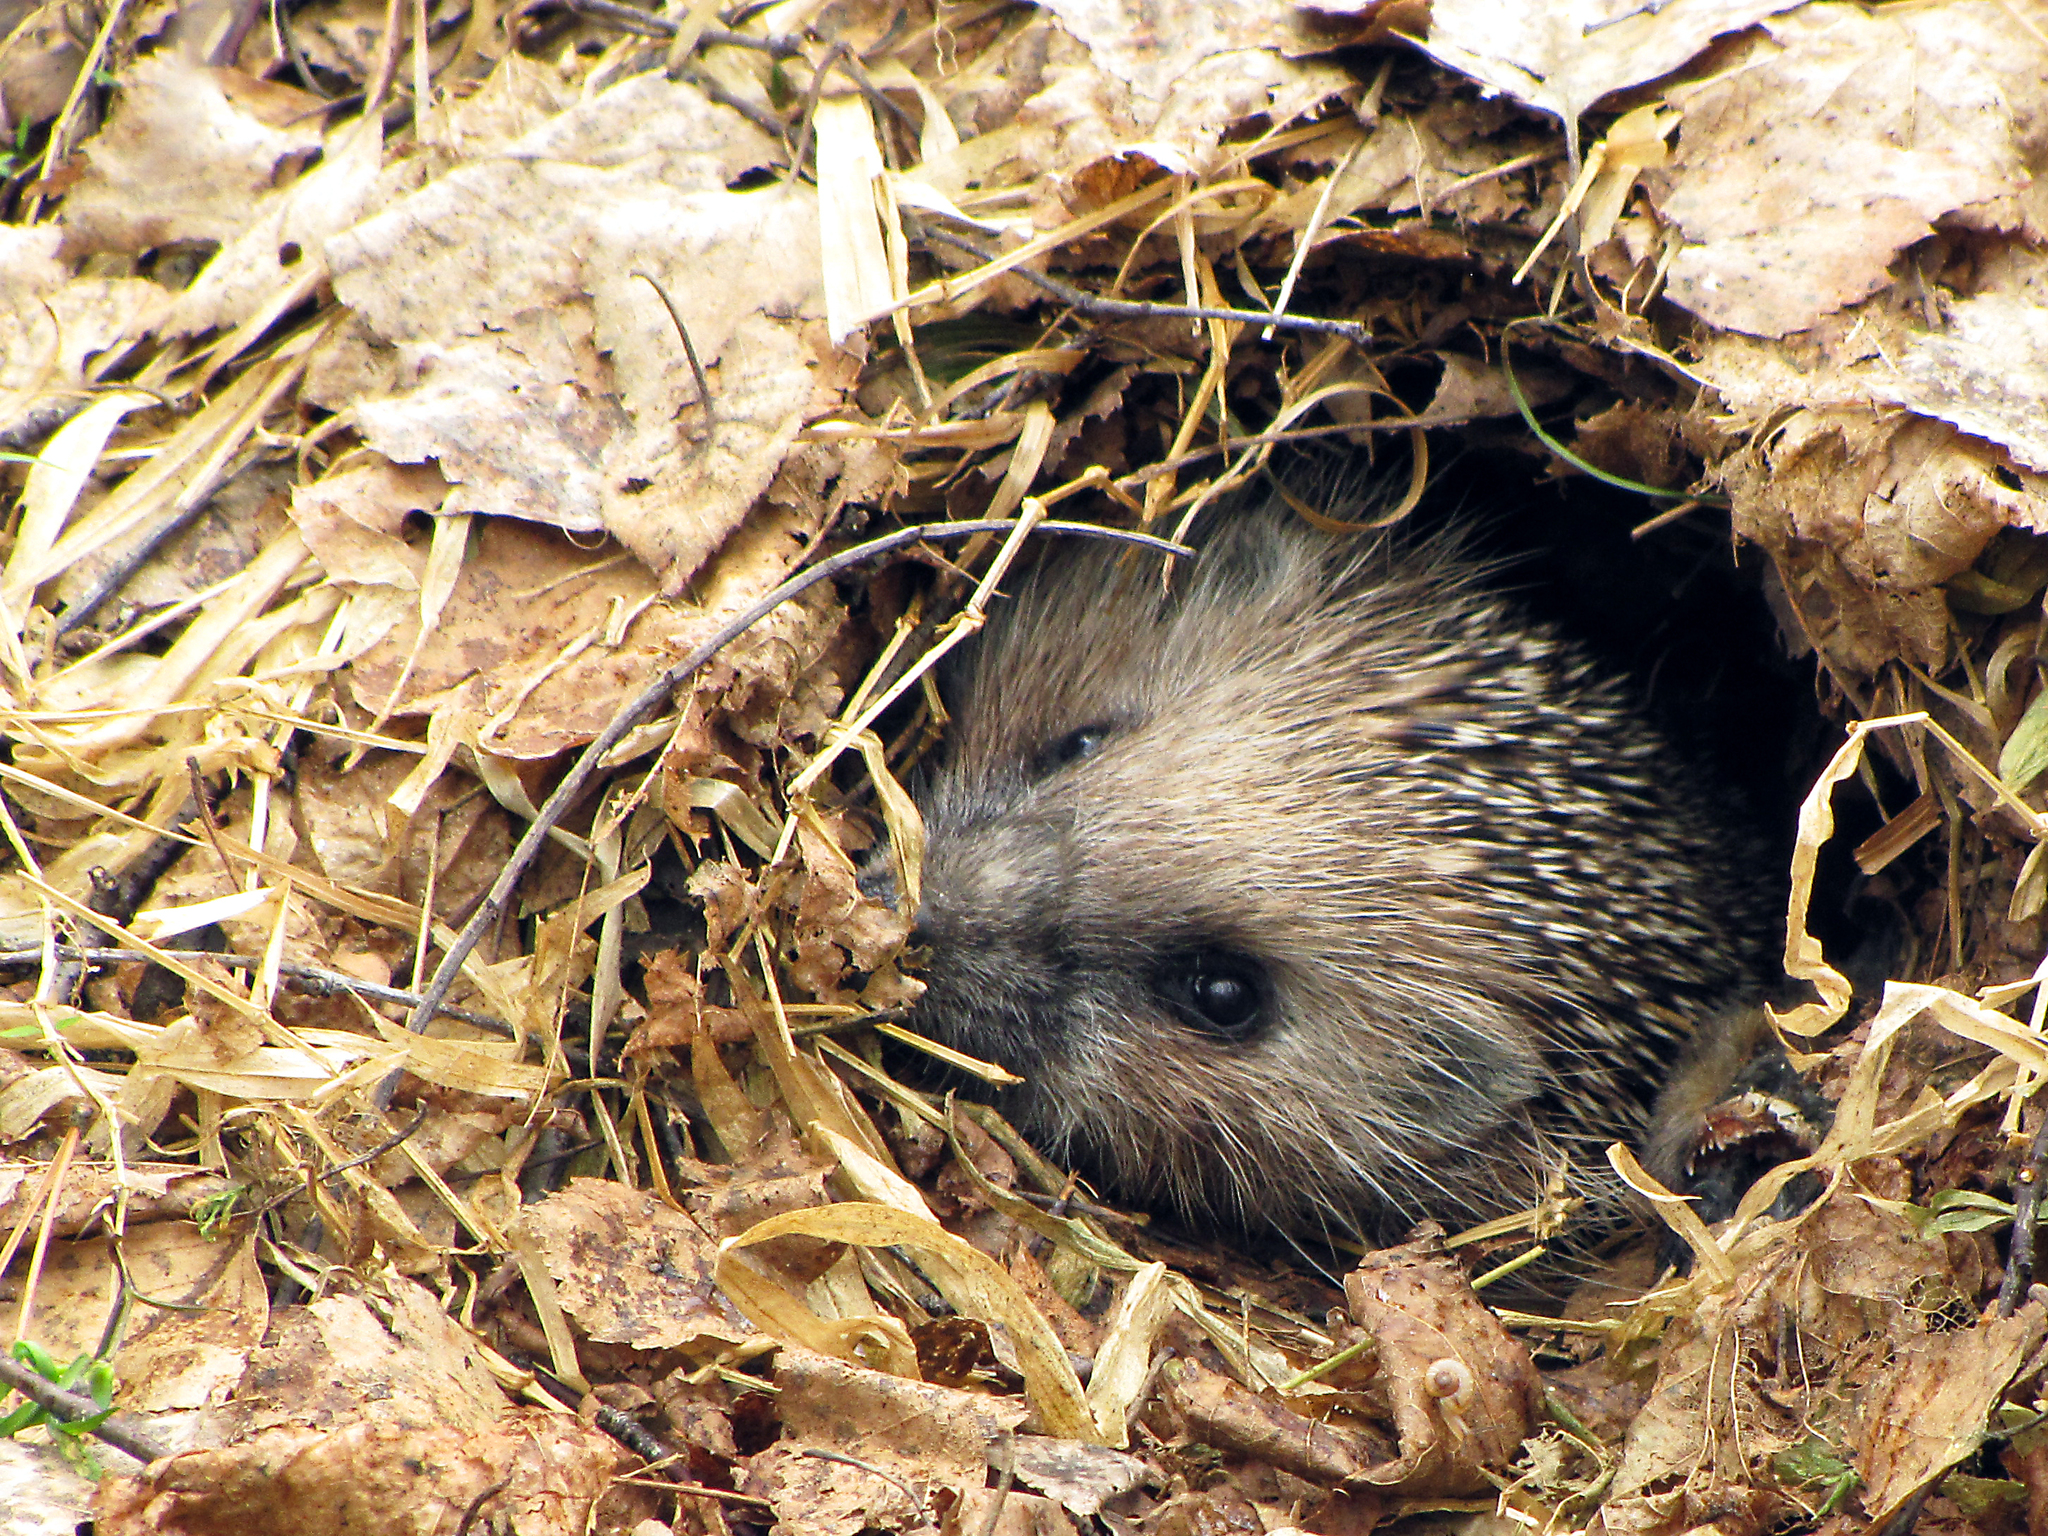 Have you ever seen a hedgehog's nest? - My, Hedgehog, Animals, Nature, Biology, Insectivores, Nest